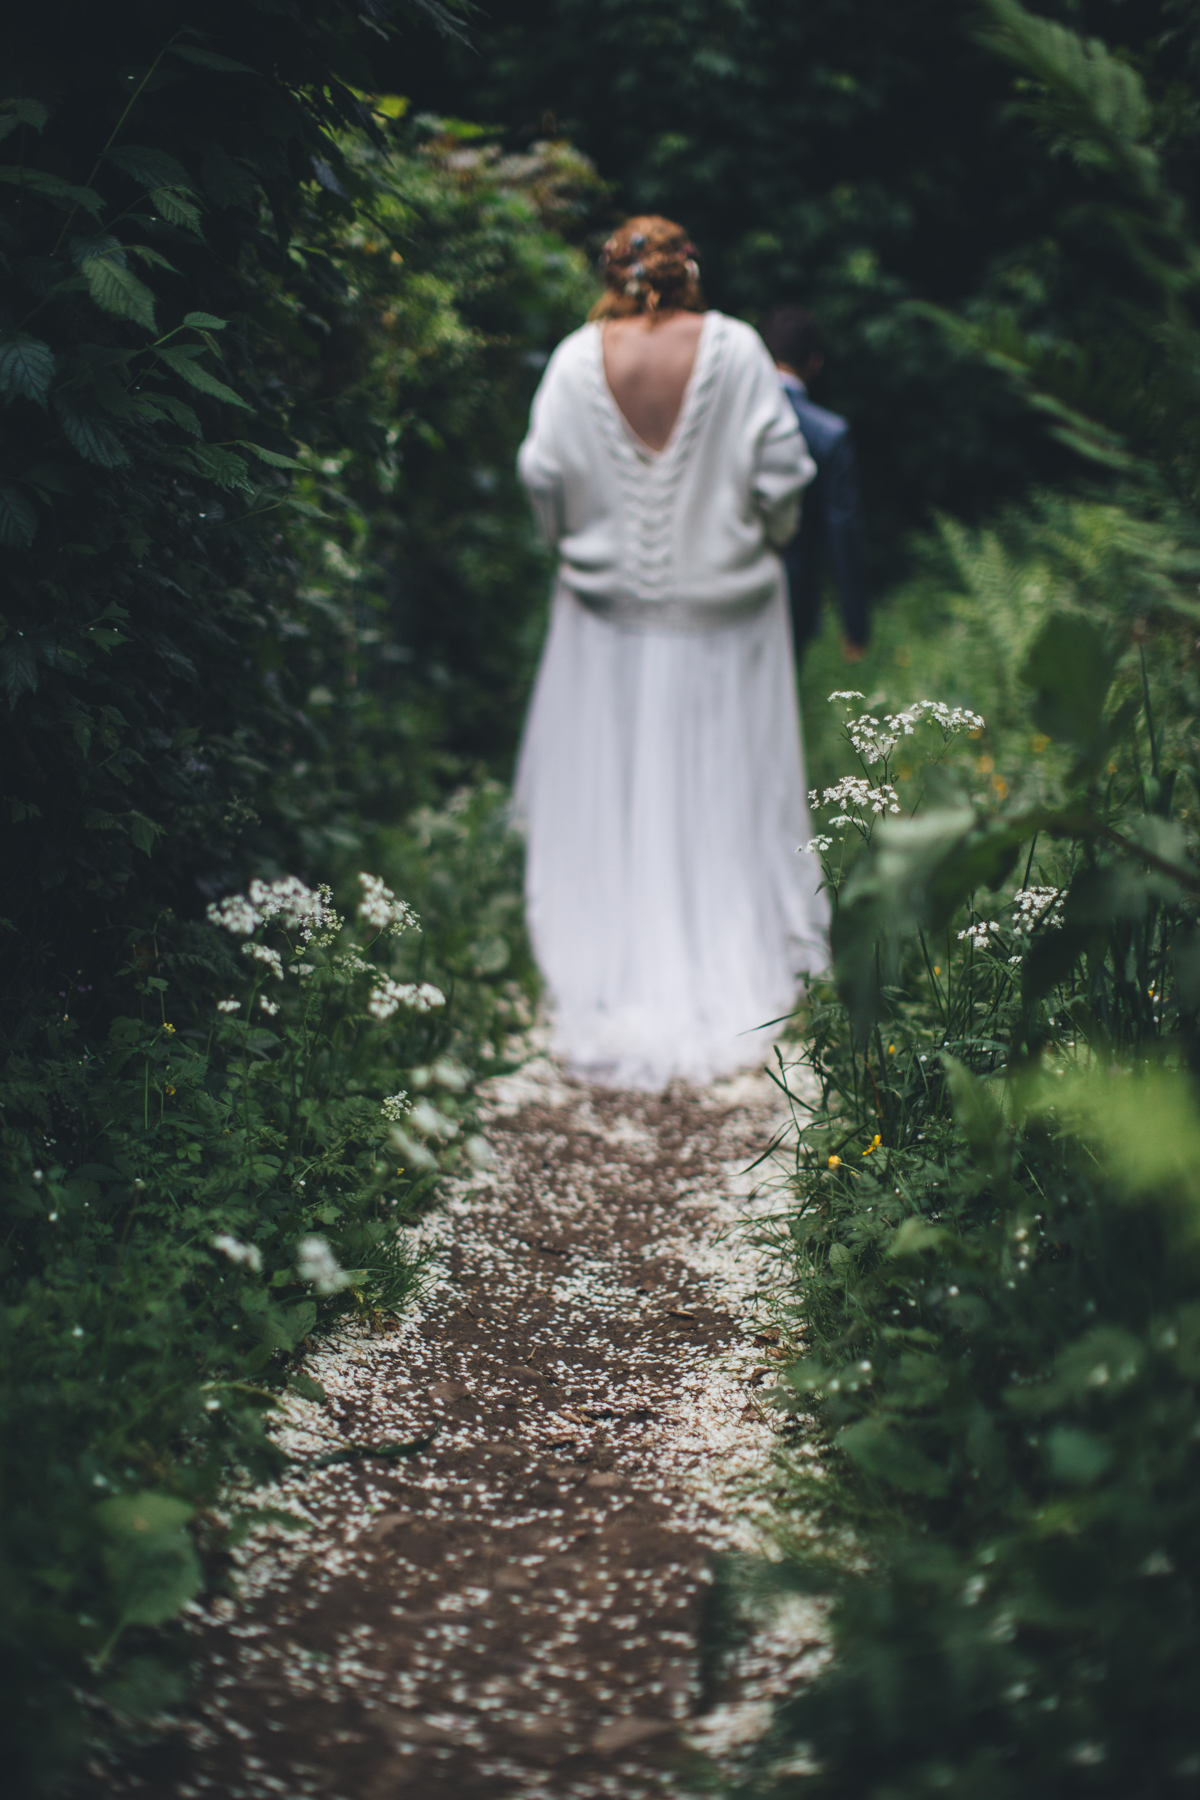 Bride walking away from the camera down a blossom lined path with green foliage surrounding her. The groom is walking in front of her and only his head and right arm can be seen. The bride is wearing a white jumper, with a low cut neckline, over her wedding dress